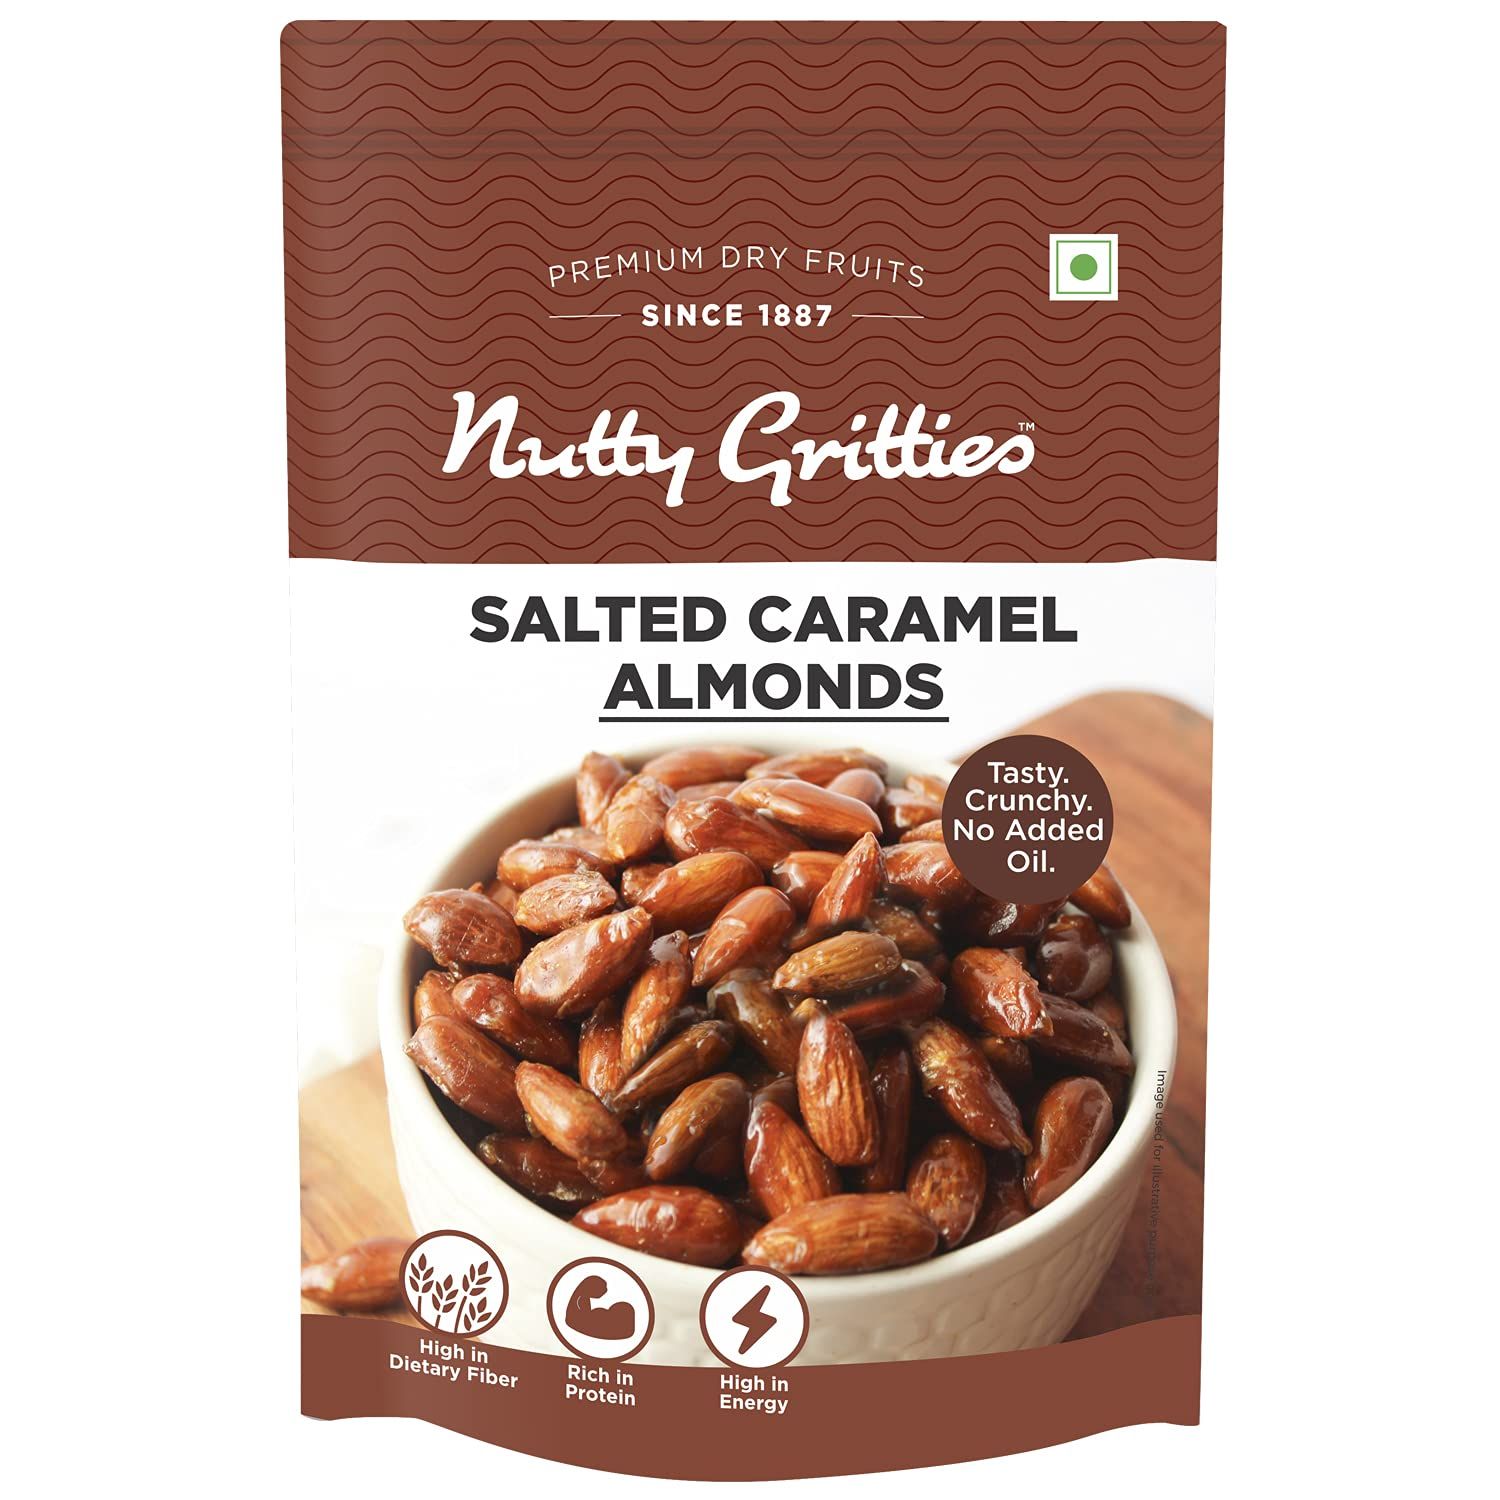 Nutty Gritties Salted Caramel Almonds Image